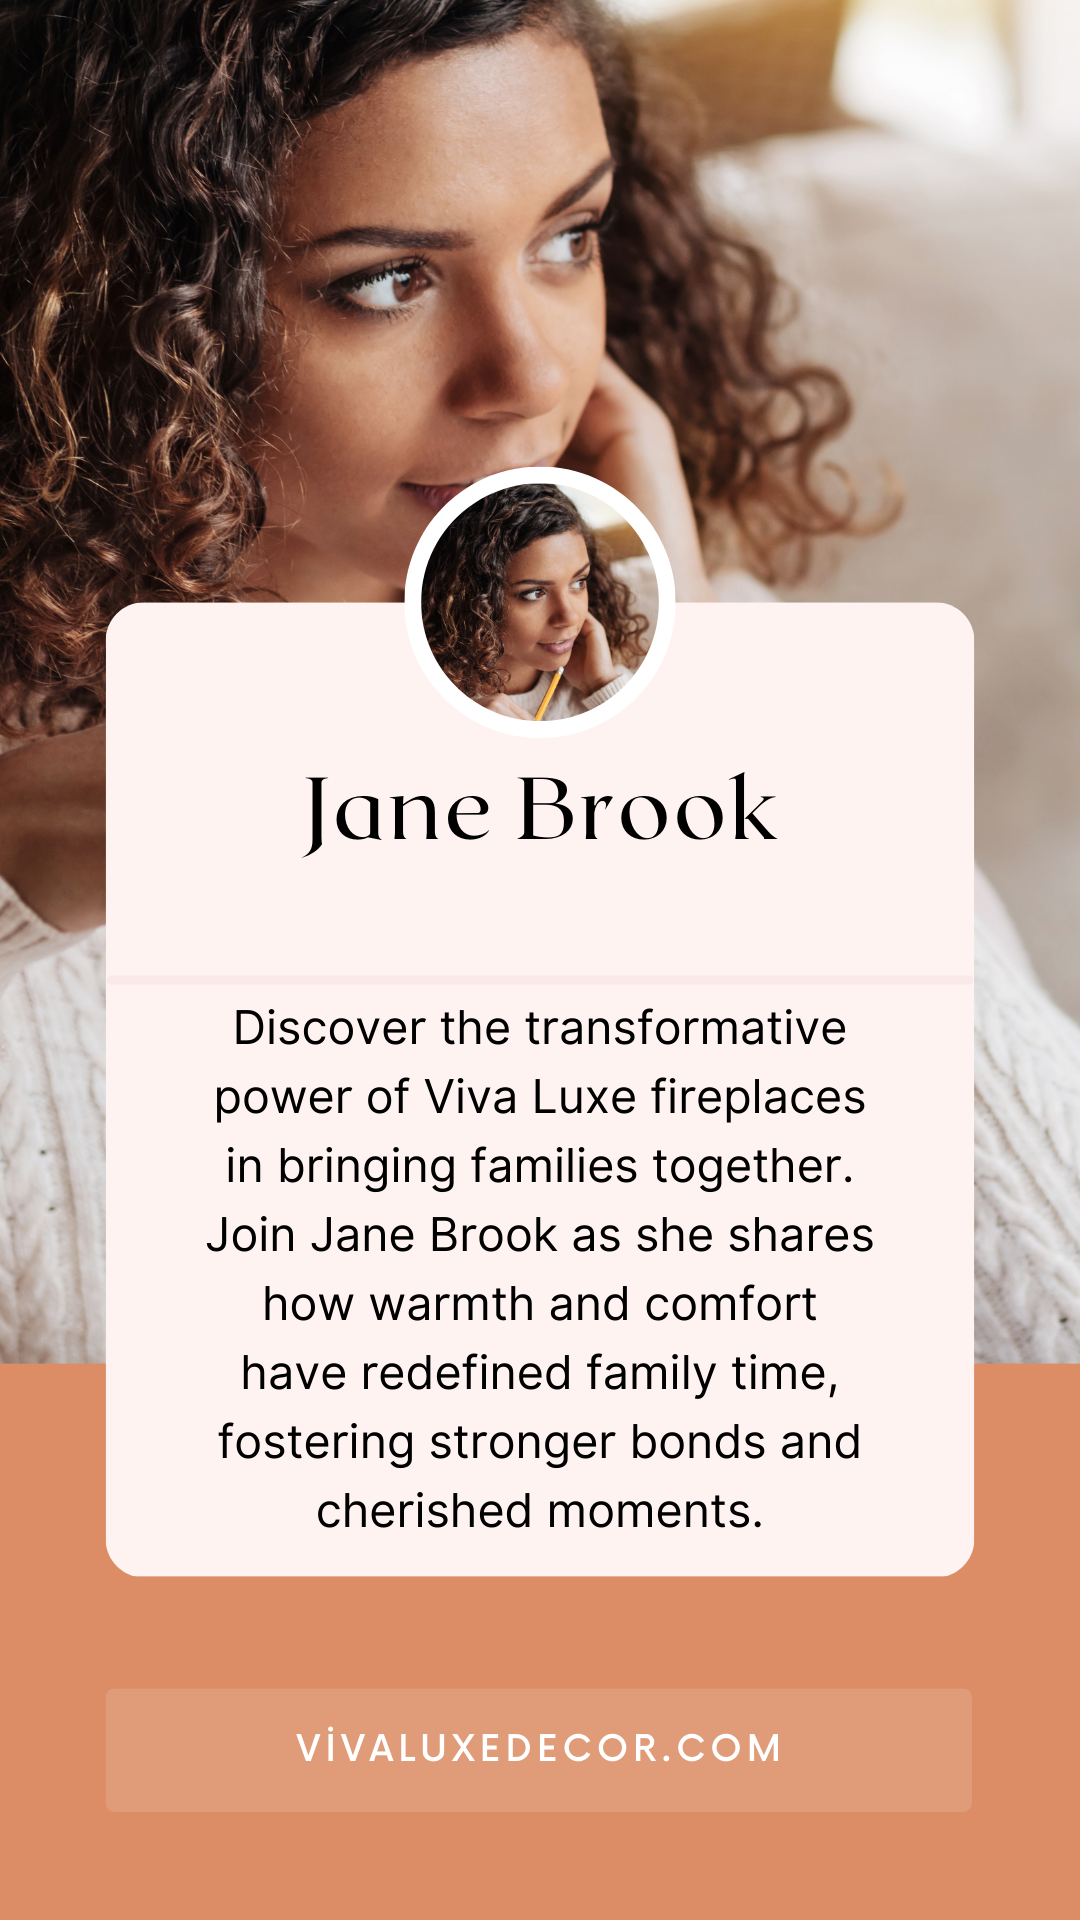 Bringing Families Together: The Power of Viva Luxe Fireplaces